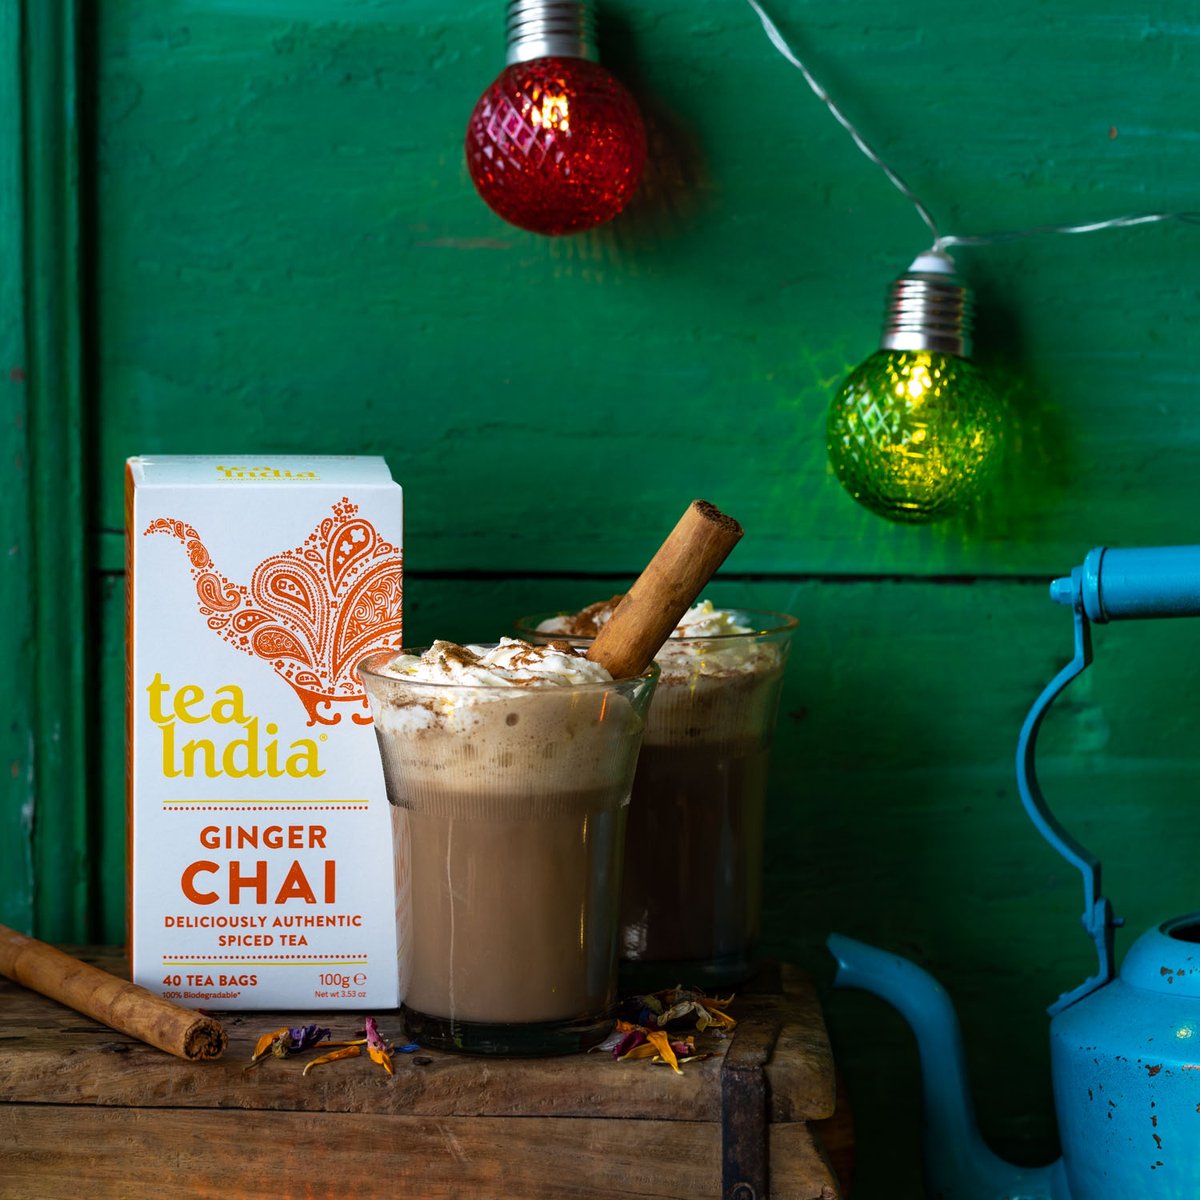 Getting into the Christma spirit with a Gingerbread Spiced Chai Latte! Brew the chai in a saucepan of milk, then add a bit of molasses and maple syrup. Top with whipped cream and cinnamon for extra yum...